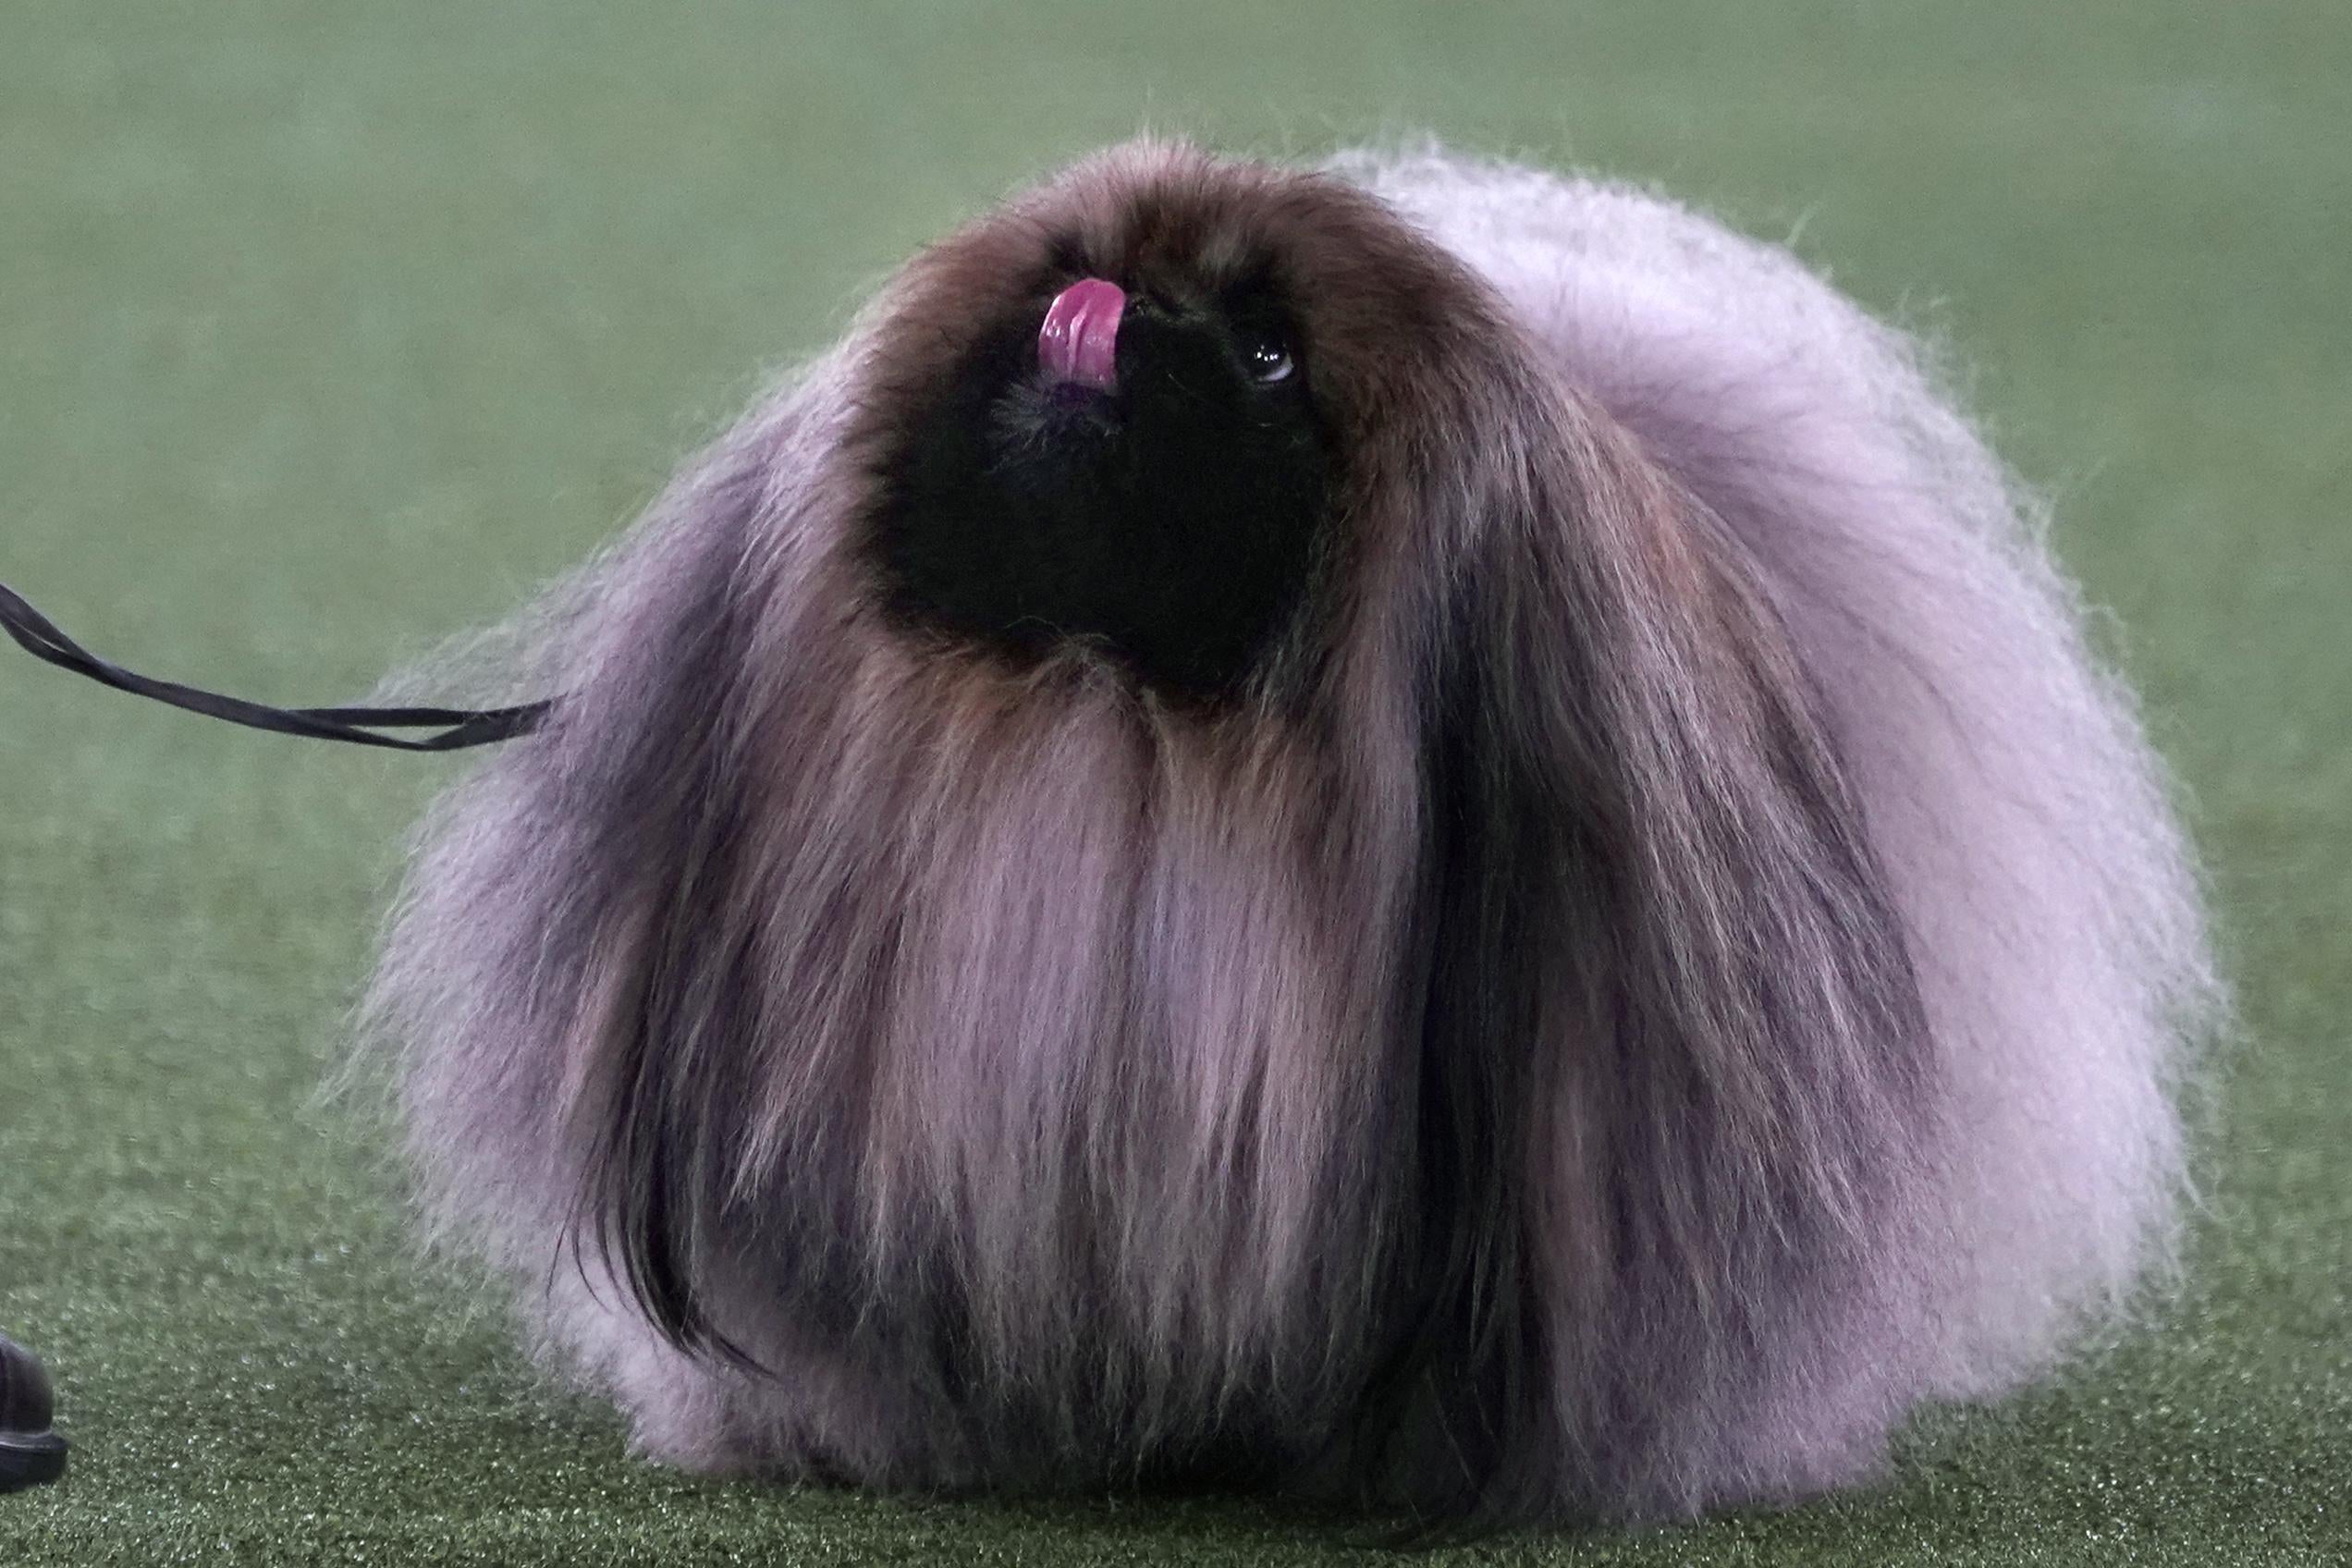 A Pekenese named "Wasabi," essentially a spherical ball of fur, sticks its tongue out at the WKC dog show.  